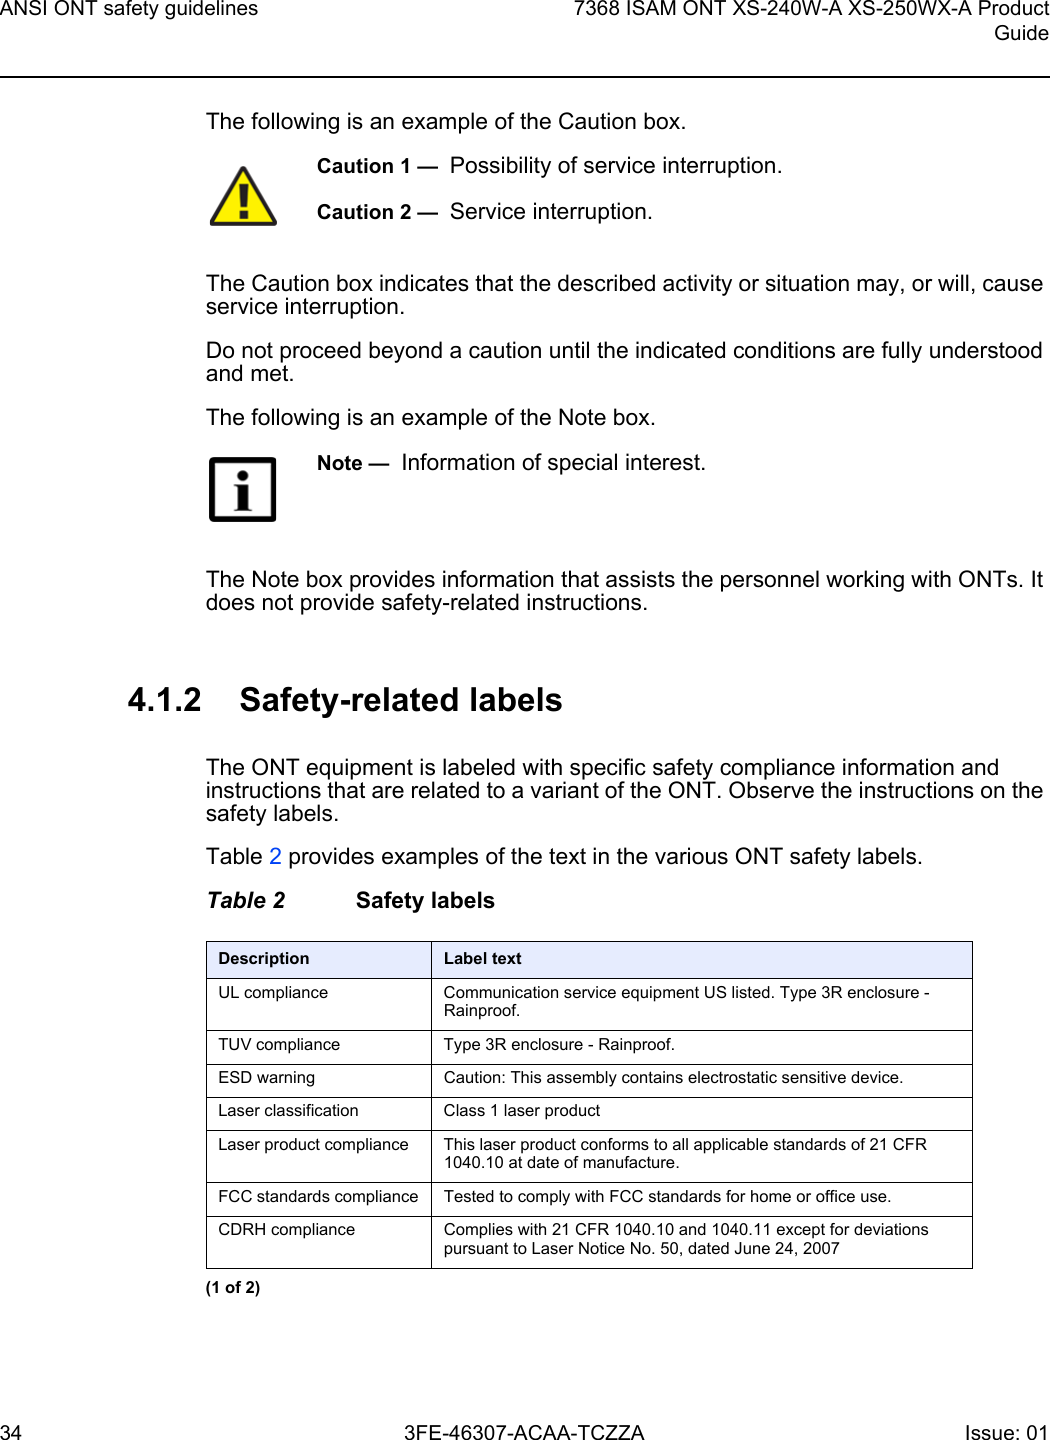 ANSI ONT safety guidelines347368 ISAM ONT XS-240W-A XS-250WX-A ProductGuide3FE-46307-ACAA-TCZZA Issue: 01 The following is an example of the Caution box.The Caution box indicates that the described activity or situation may, or will, cause service interruption.Do not proceed beyond a caution until the indicated conditions are fully understood and met.The following is an example of the Note box.The Note box provides information that assists the personnel working with ONTs. It does not provide safety-related instructions.4.1.2 Safety-related labelsThe ONT equipment is labeled with specific safety compliance information and instructions that are related to a variant of the ONT. Observe the instructions on the safety labels.Table 2 provides examples of the text in the various ONT safety labels.Table 2 Safety labelsCaution 1 —  Possibility of service interruption.Caution 2 —  Service interruption.Note —  Information of special interest.Description Label textUL compliance Communication service equipment US listed. Type 3R enclosure - Rainproof.TUV compliance Type 3R enclosure - Rainproof.ESD warning Caution: This assembly contains electrostatic sensitive device.Laser classification Class 1 laser productLaser product compliance This laser product conforms to all applicable standards of 21 CFR 1040.10 at date of manufacture.FCC standards compliance Tested to comply with FCC standards for home or office use.CDRH compliance Complies with 21 CFR 1040.10 and 1040.11 except for deviations pursuant to Laser Notice No. 50, dated June 24, 2007(1 of 2)